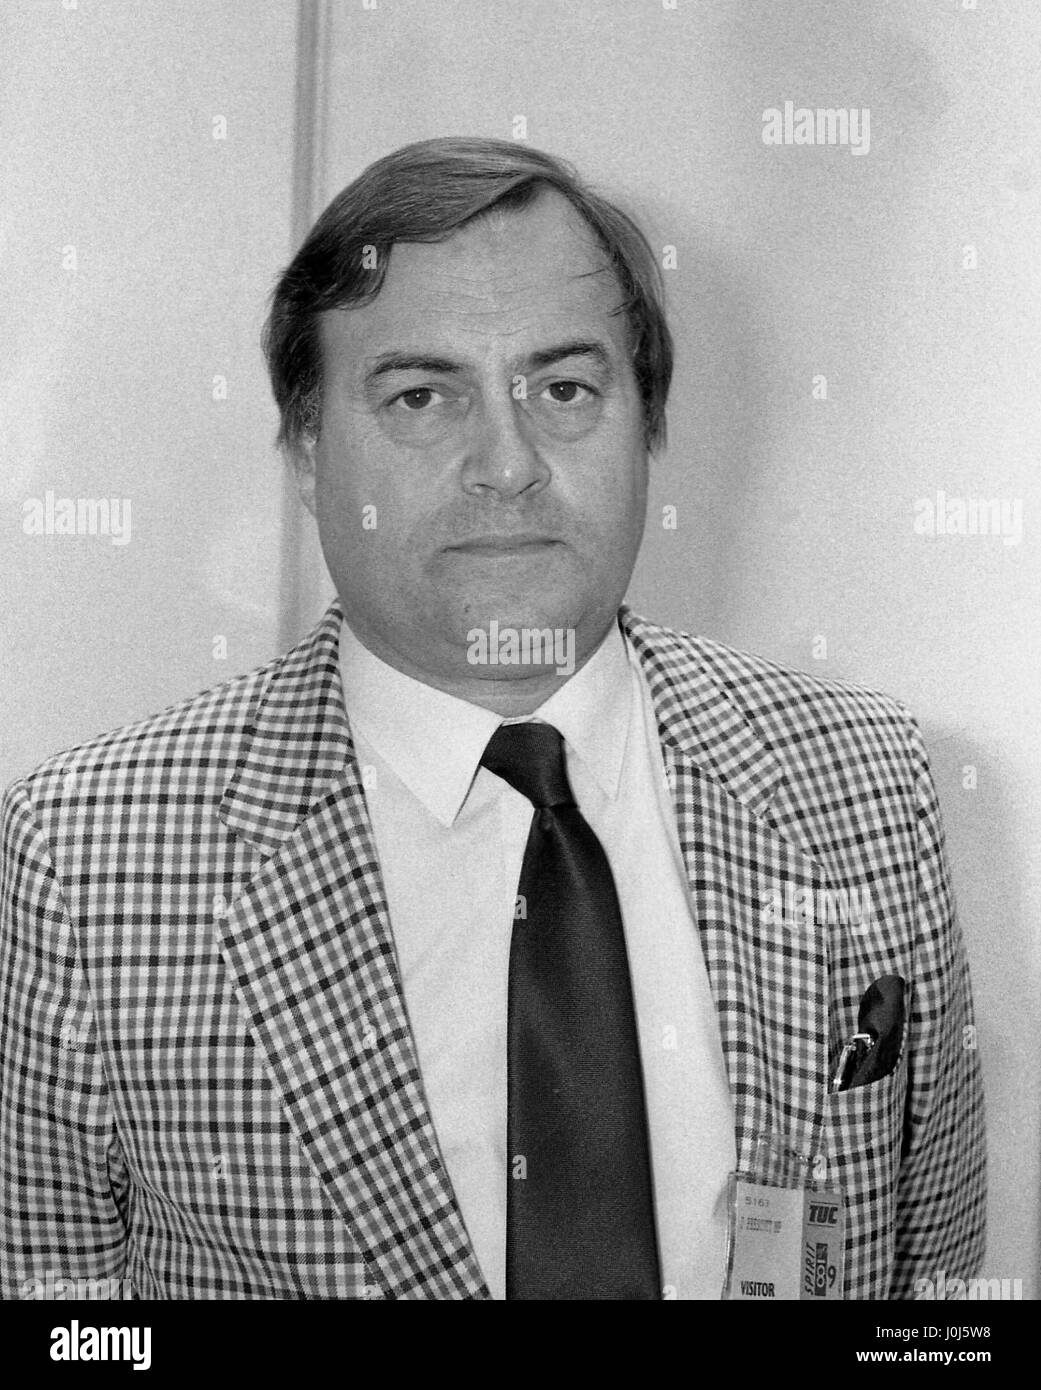 John Prescott, Shadow Secretary of State for Transport and Labour party Member of Parliament for Kingston upon Hull East, attends the Trades Union Congress in Blackpool, England on September 4, 1989. Stock Photo